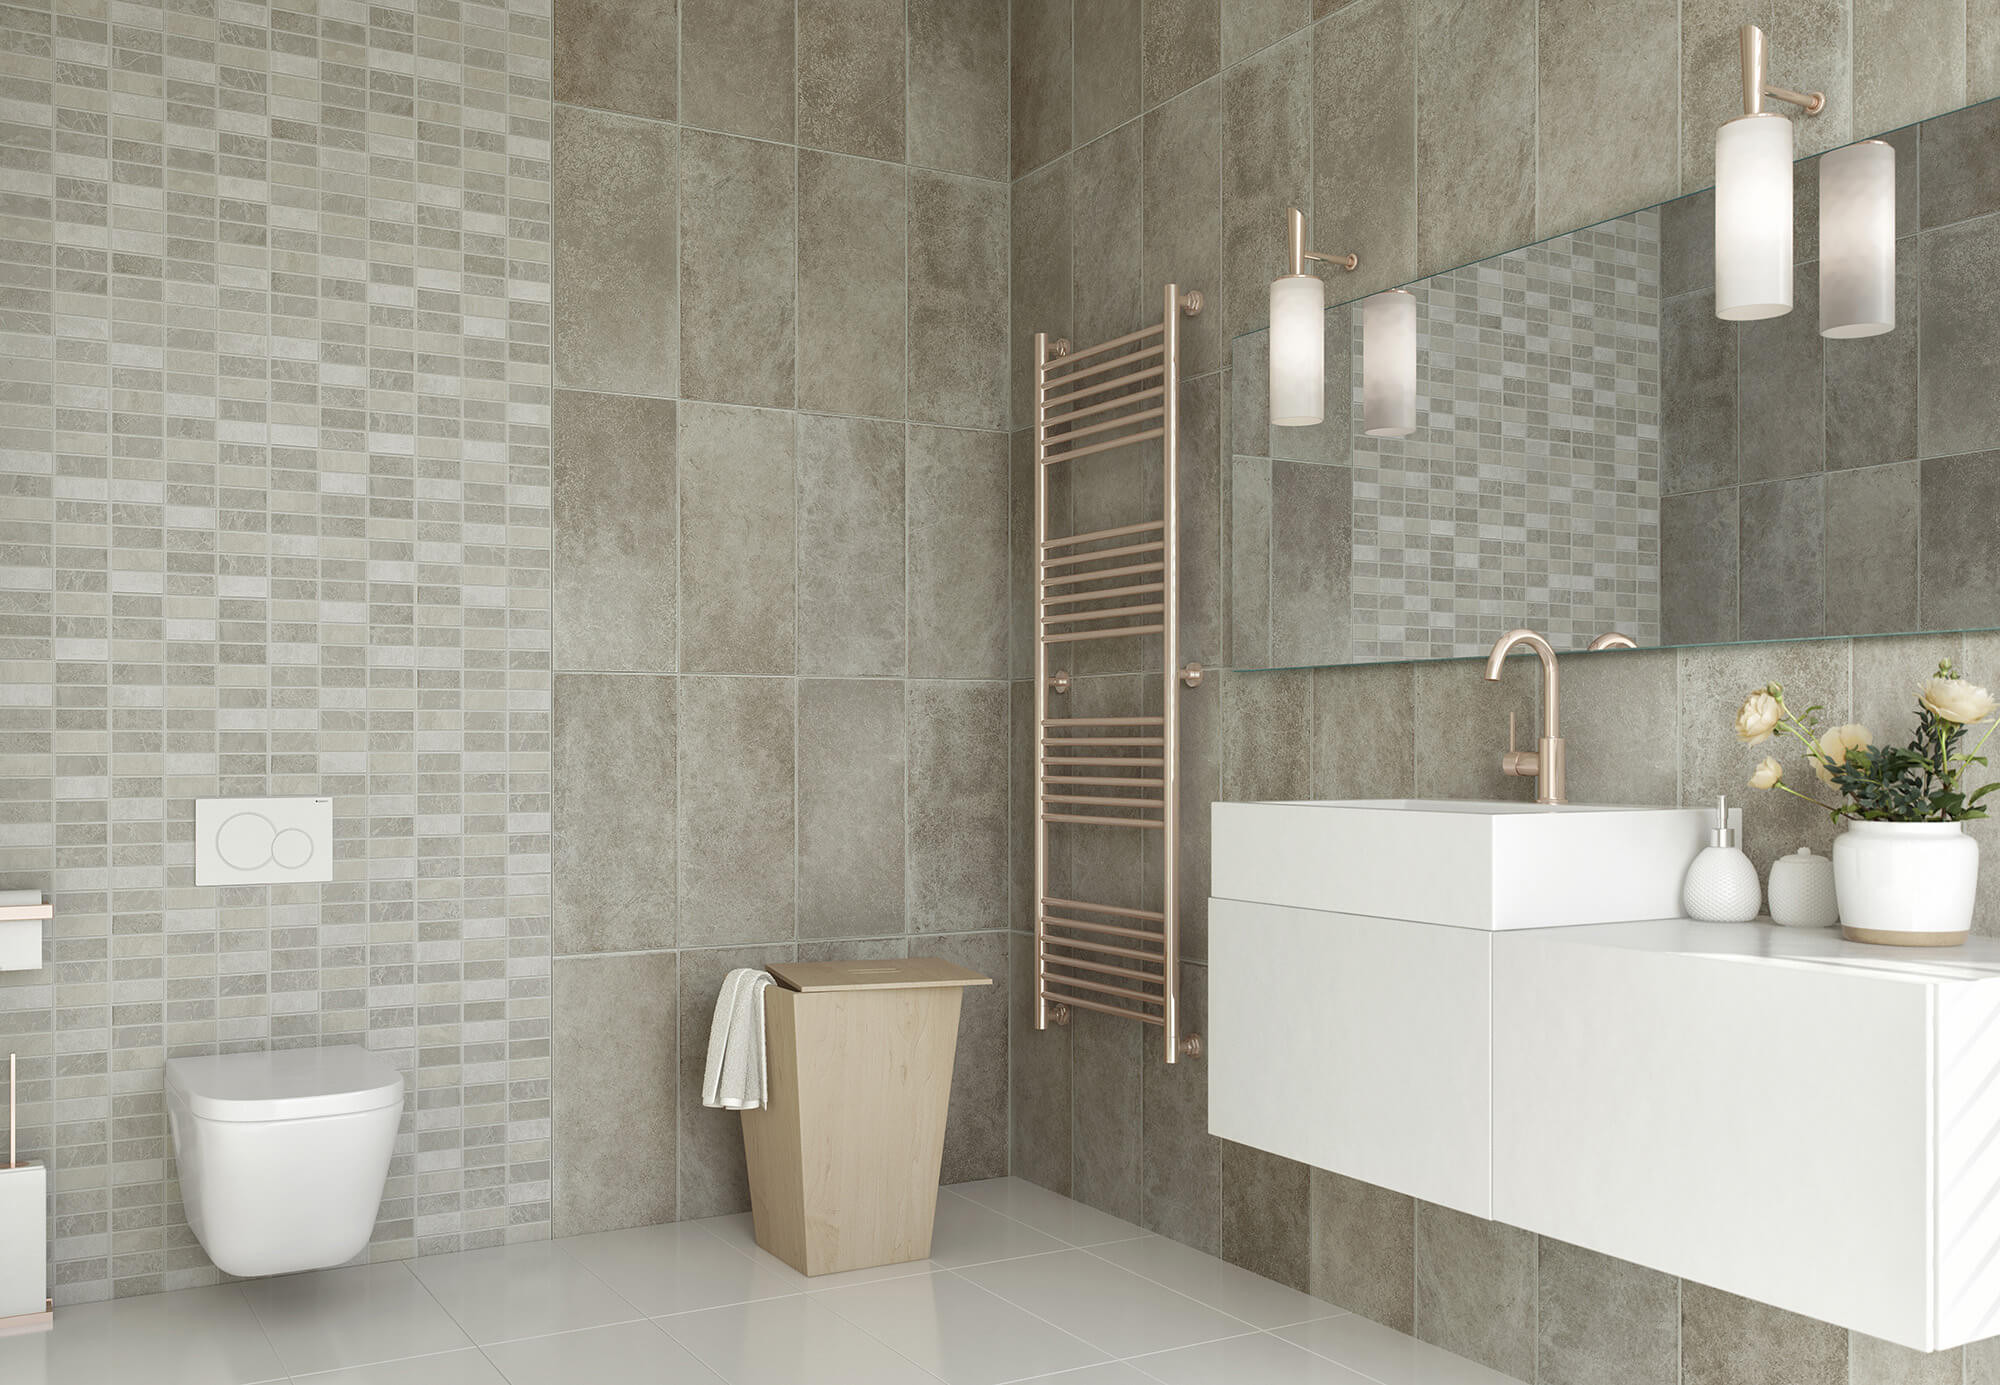 Bathroom Wall Covering Panels
 15 Modern Bathroom Wall Panels for Your Home Interior